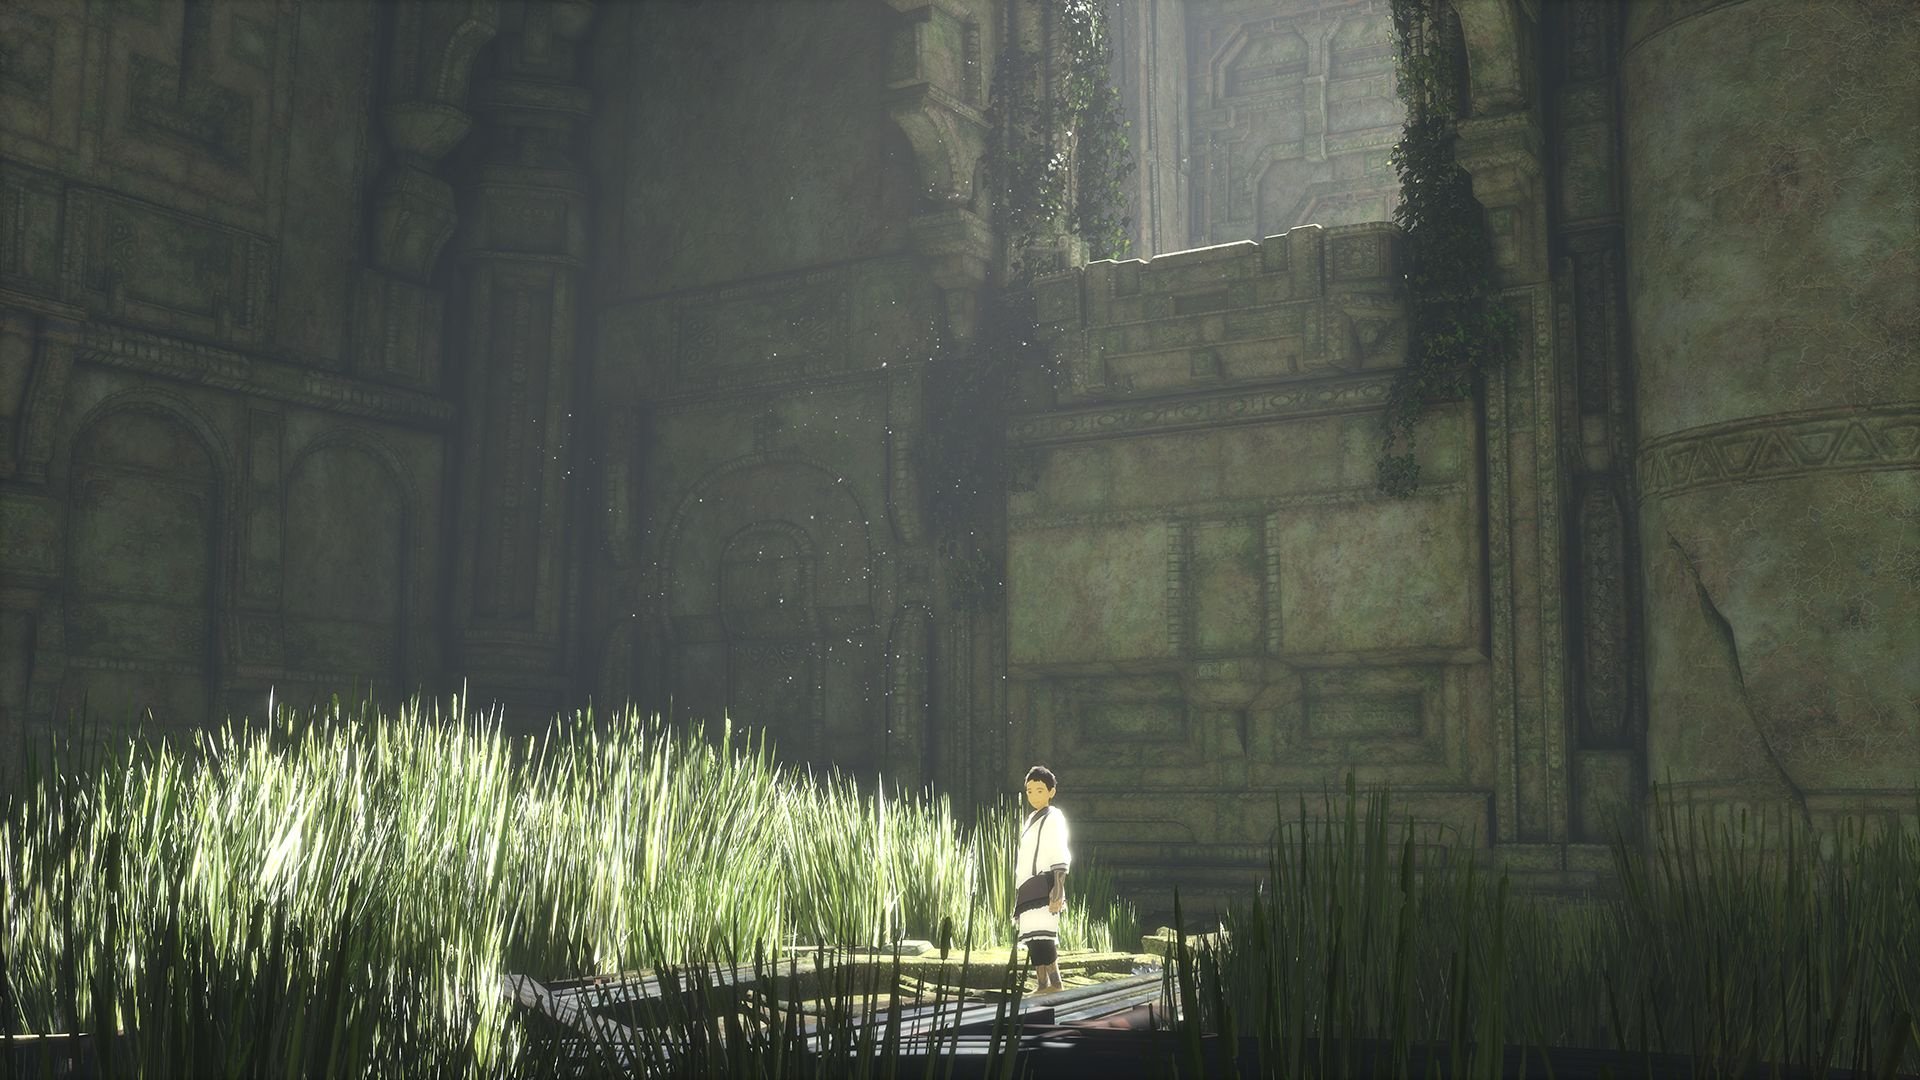 The Last Guardian Game Review